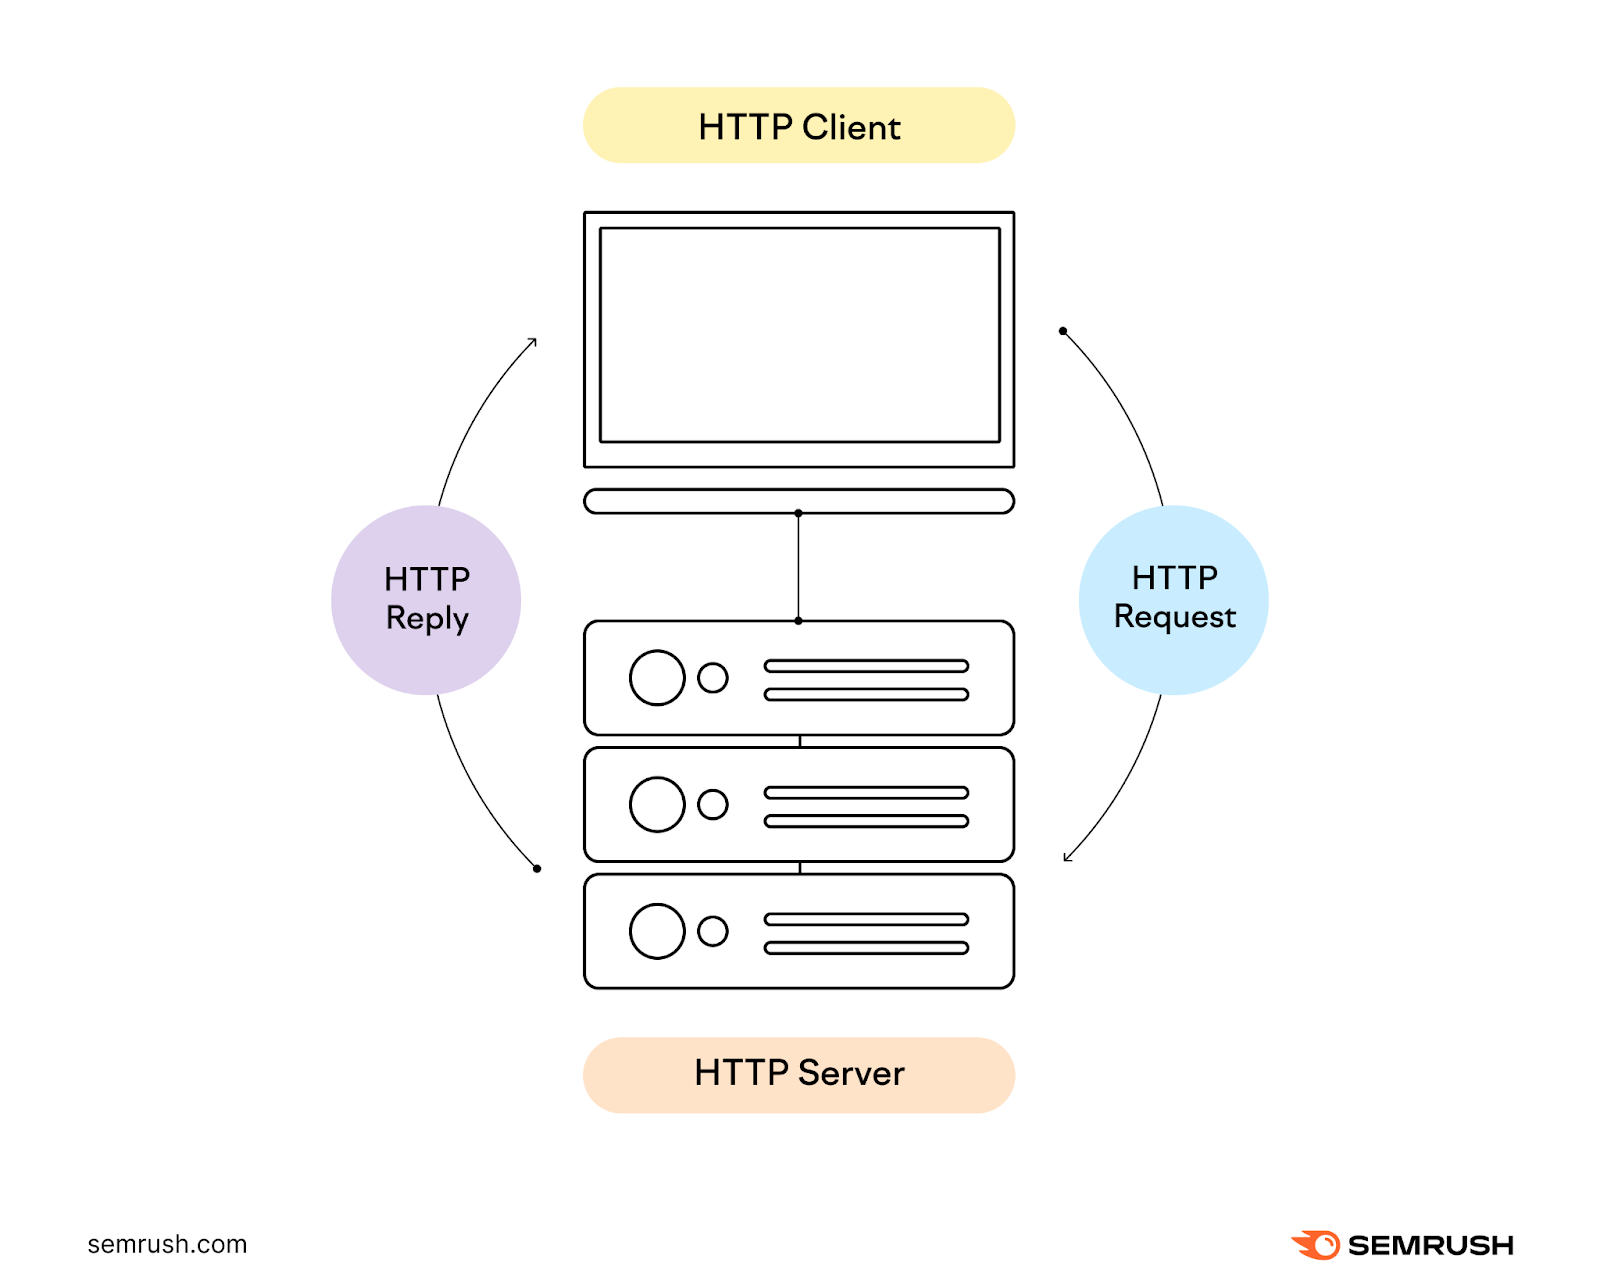 An infographic showing how "HTTP Client" sends request to "HTTP Server"